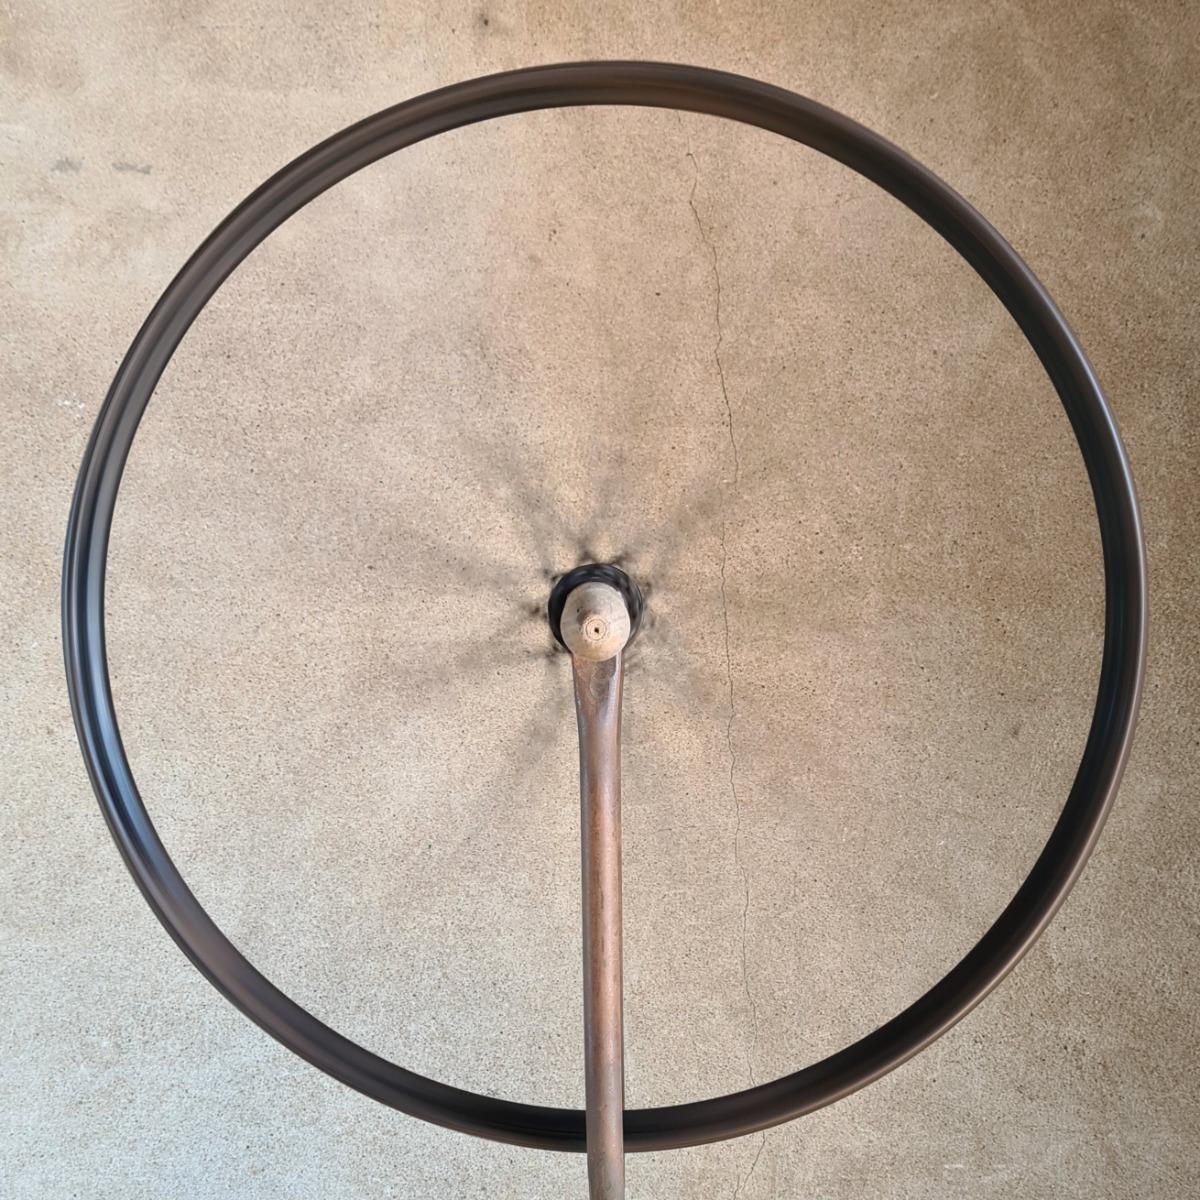 Enigmatic Bicycle wheel sculpture